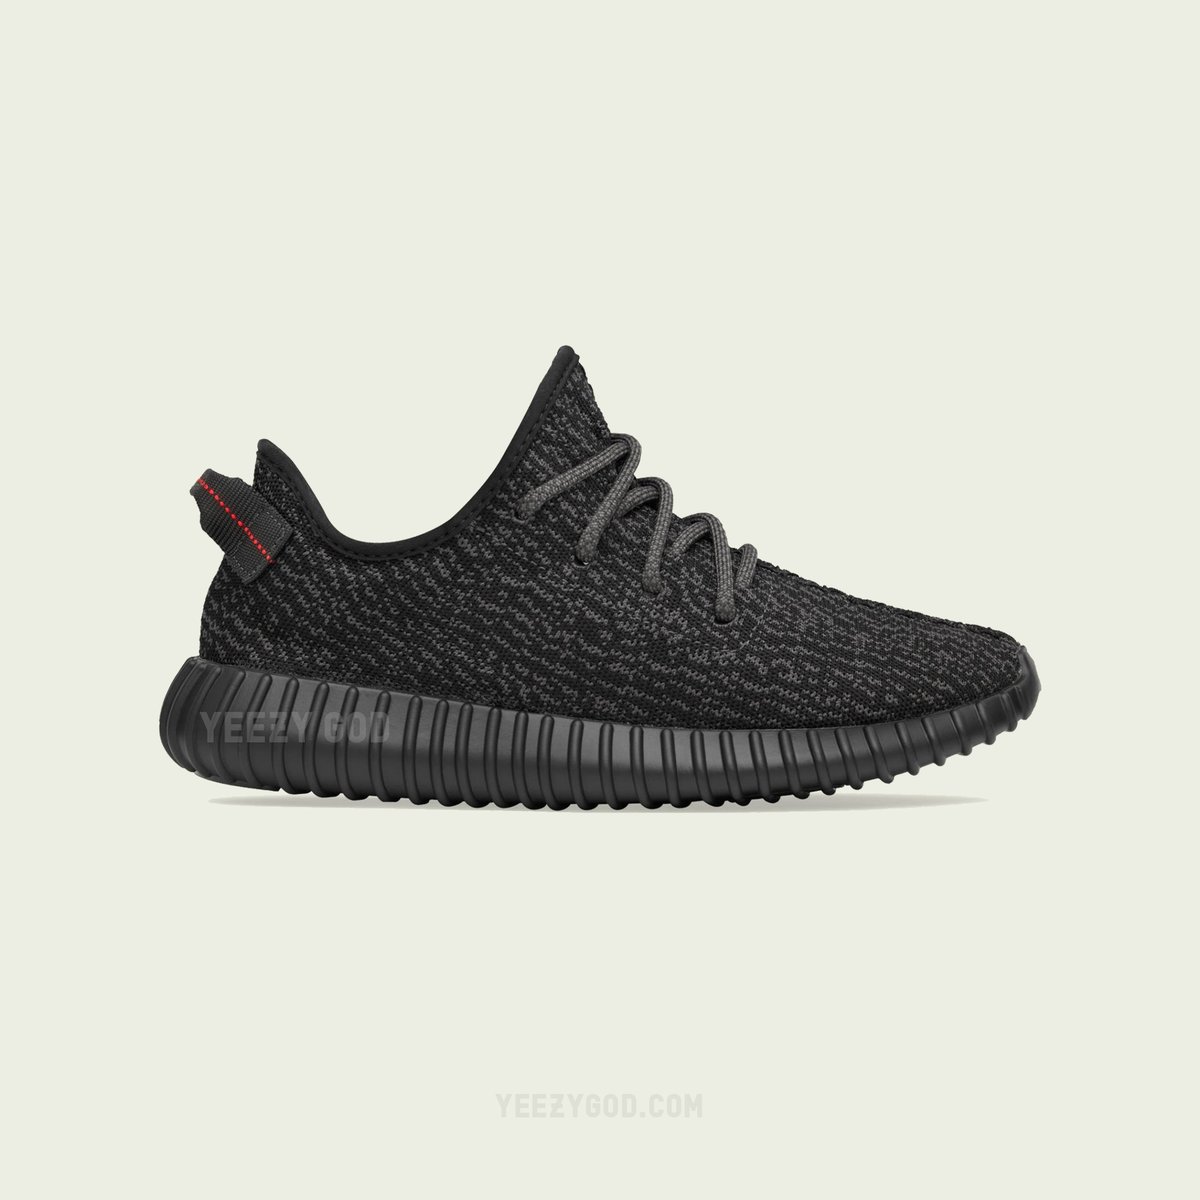 YEEZY 350 V1 PIRATE BLACK

10PM EST
2 HOUR RAFFLE

DROP A LIKE IF U BEEN WAITING FOR THIS MOMENT